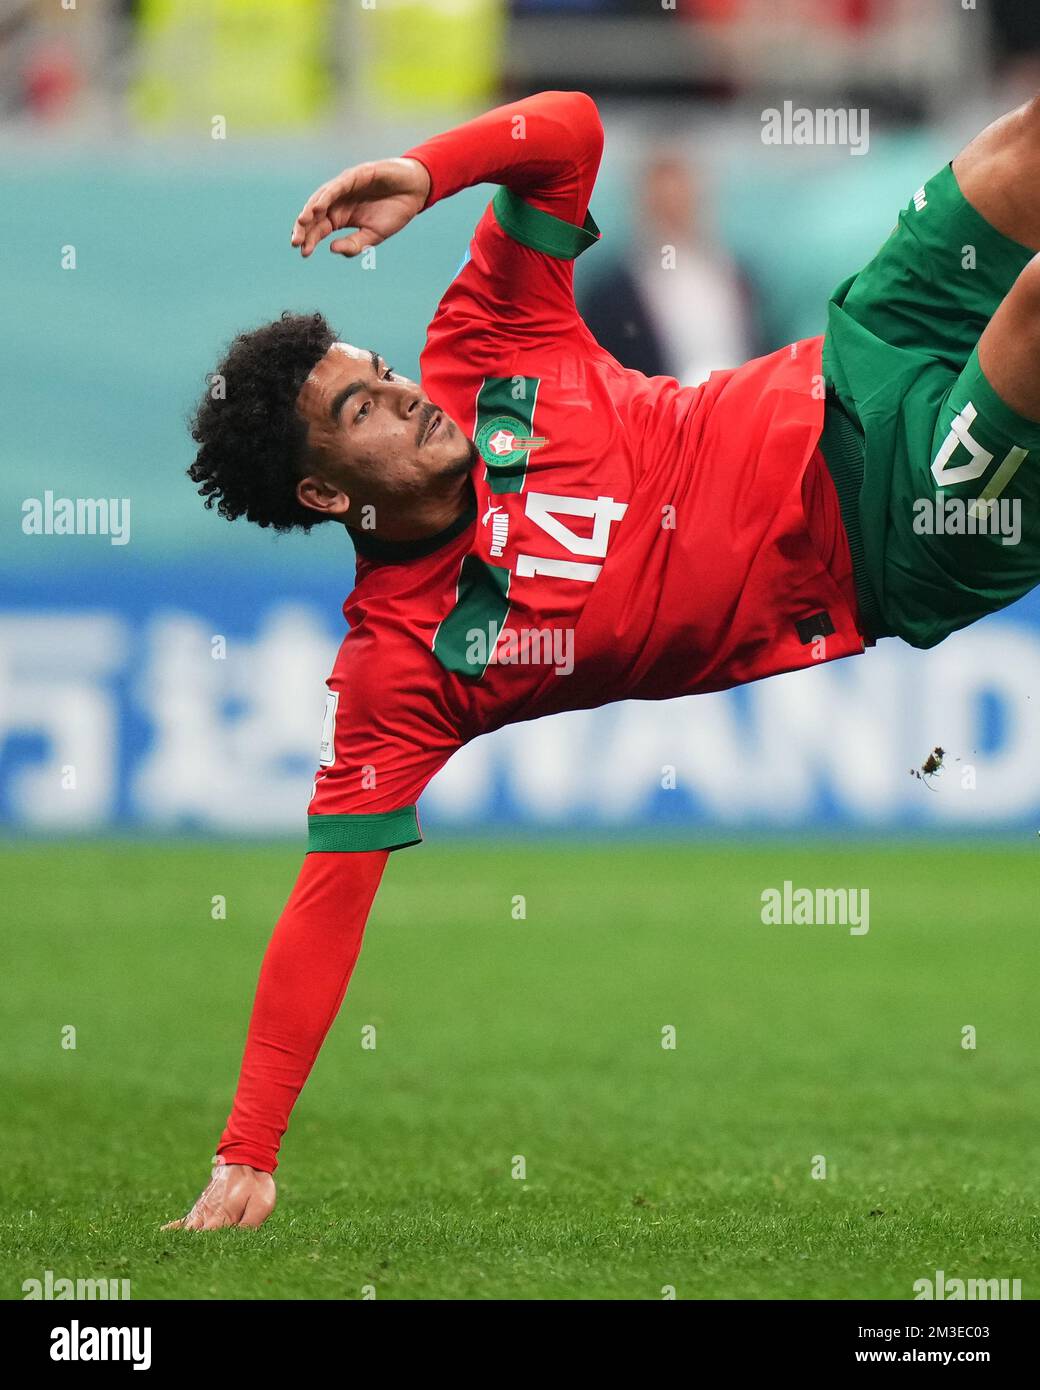 Zakaria Aboukhlal of Morocco during the FIFA World Cup Qatar 2022 match, Semi-final between Frtance and Morocco played at Al Bayt Stadium on Dec 14, 2022 in Al Khor Qatar